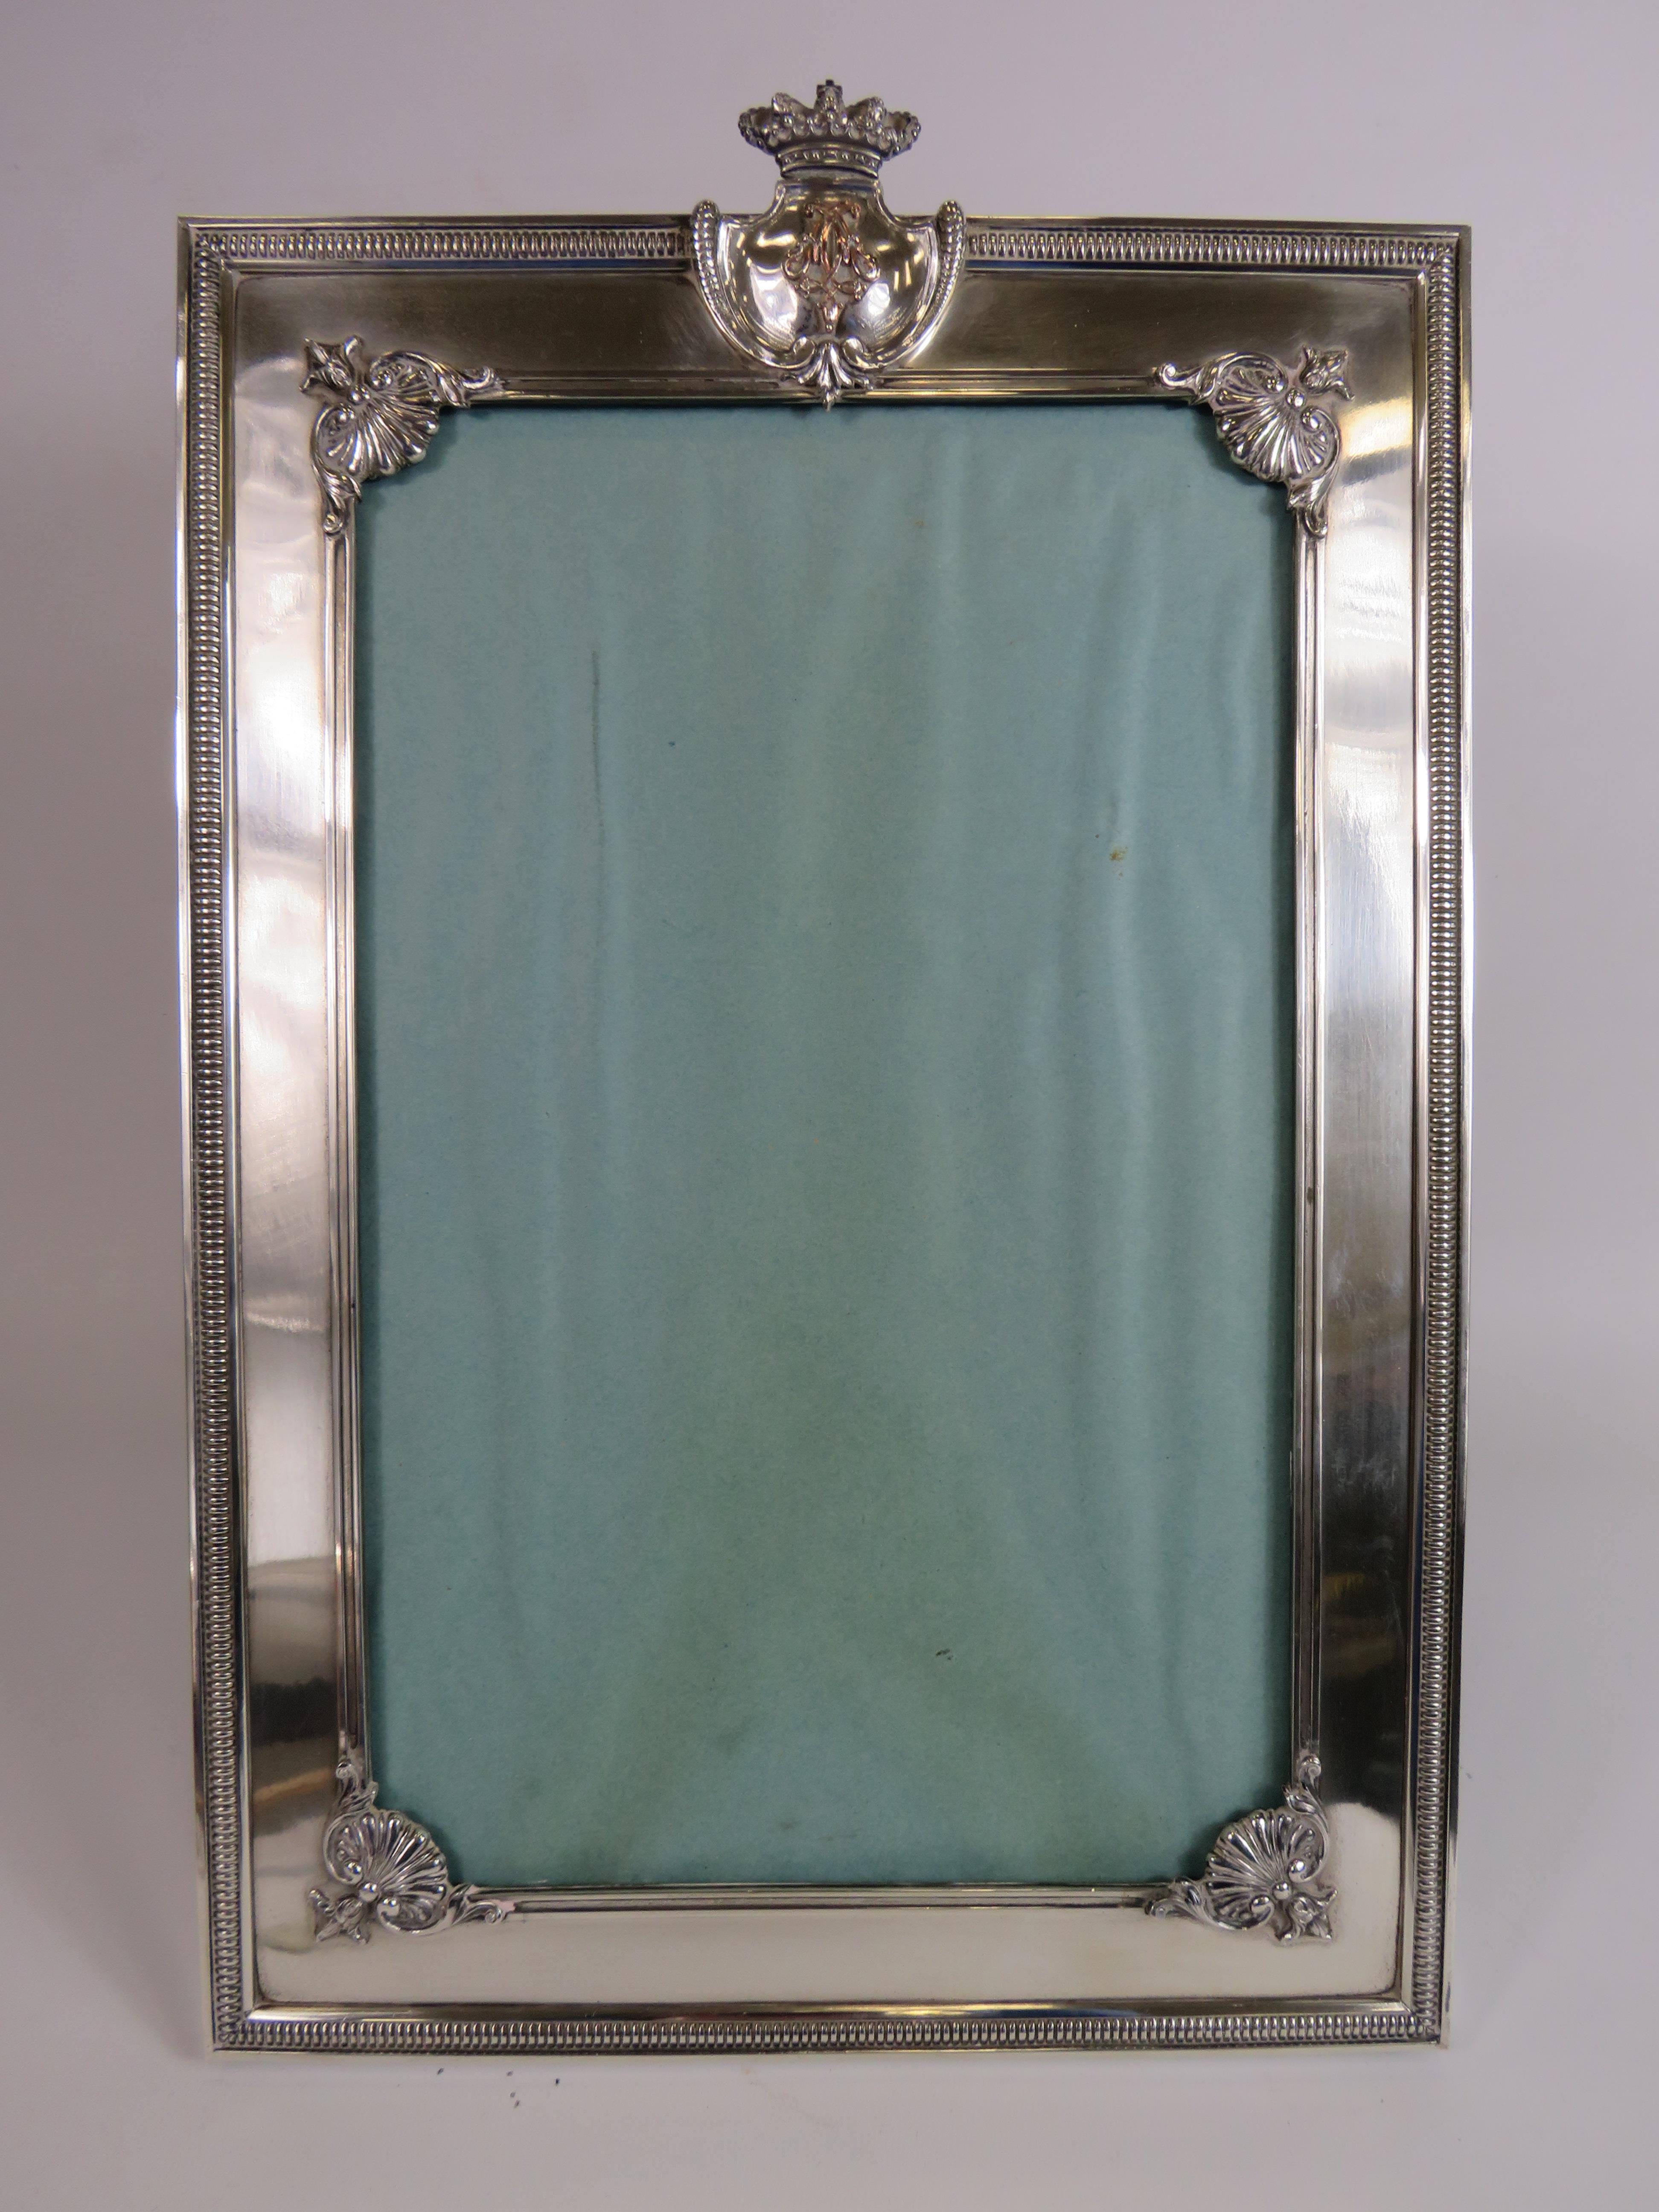 Large silver plated picture frame, 17" by 11.5". Requires new glass.